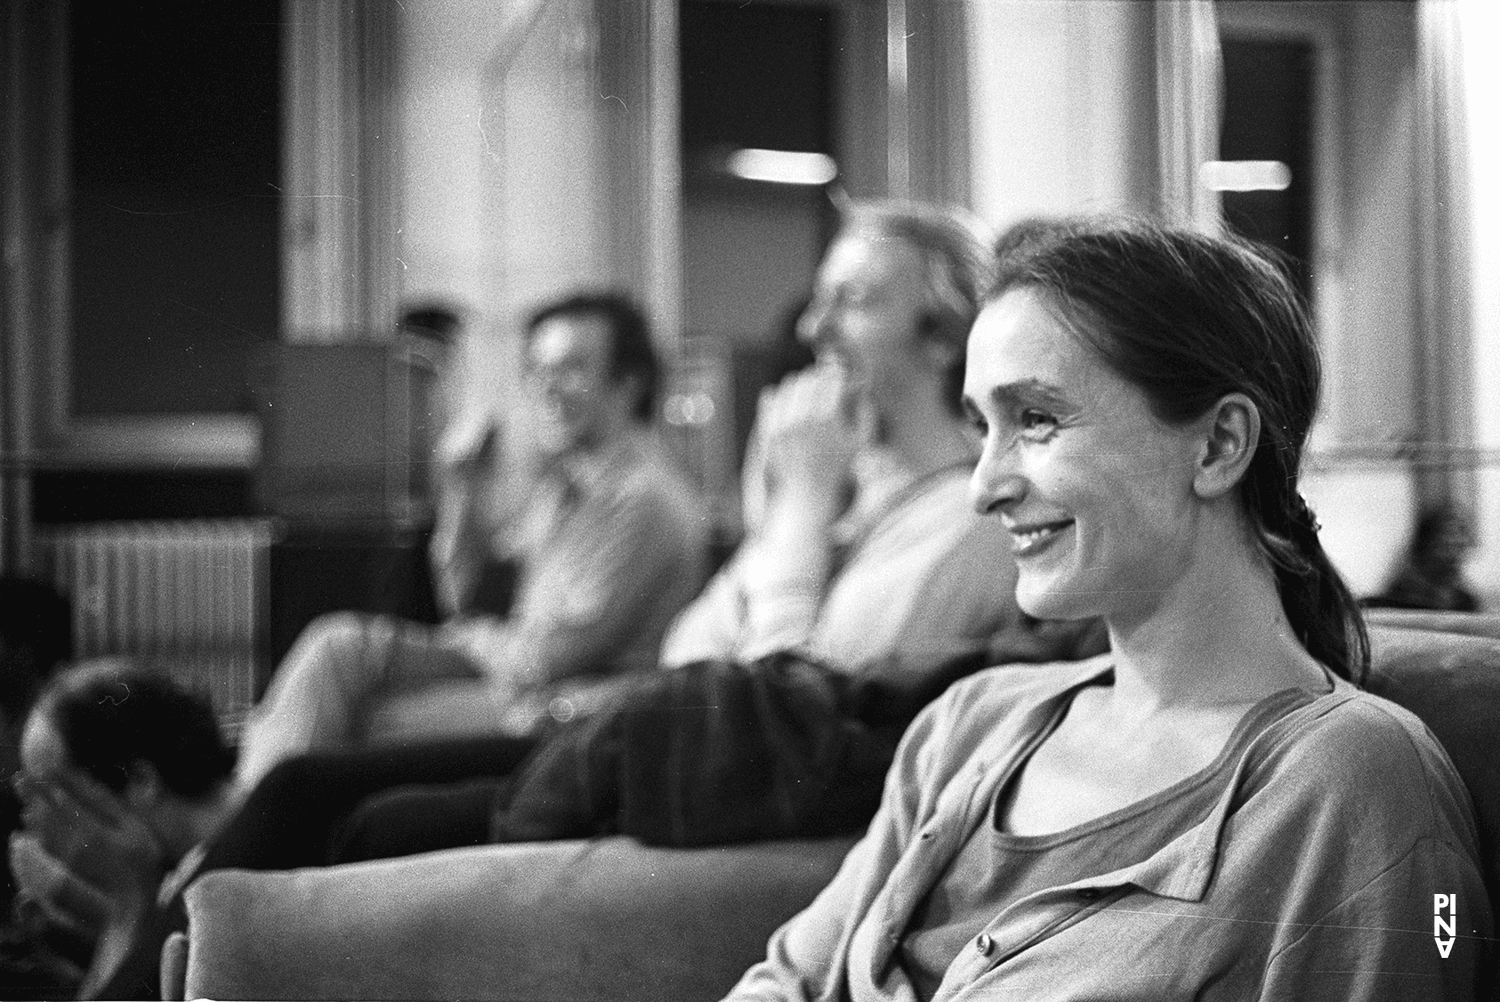 Photograph of Pina Bausch and Dominique Mercy